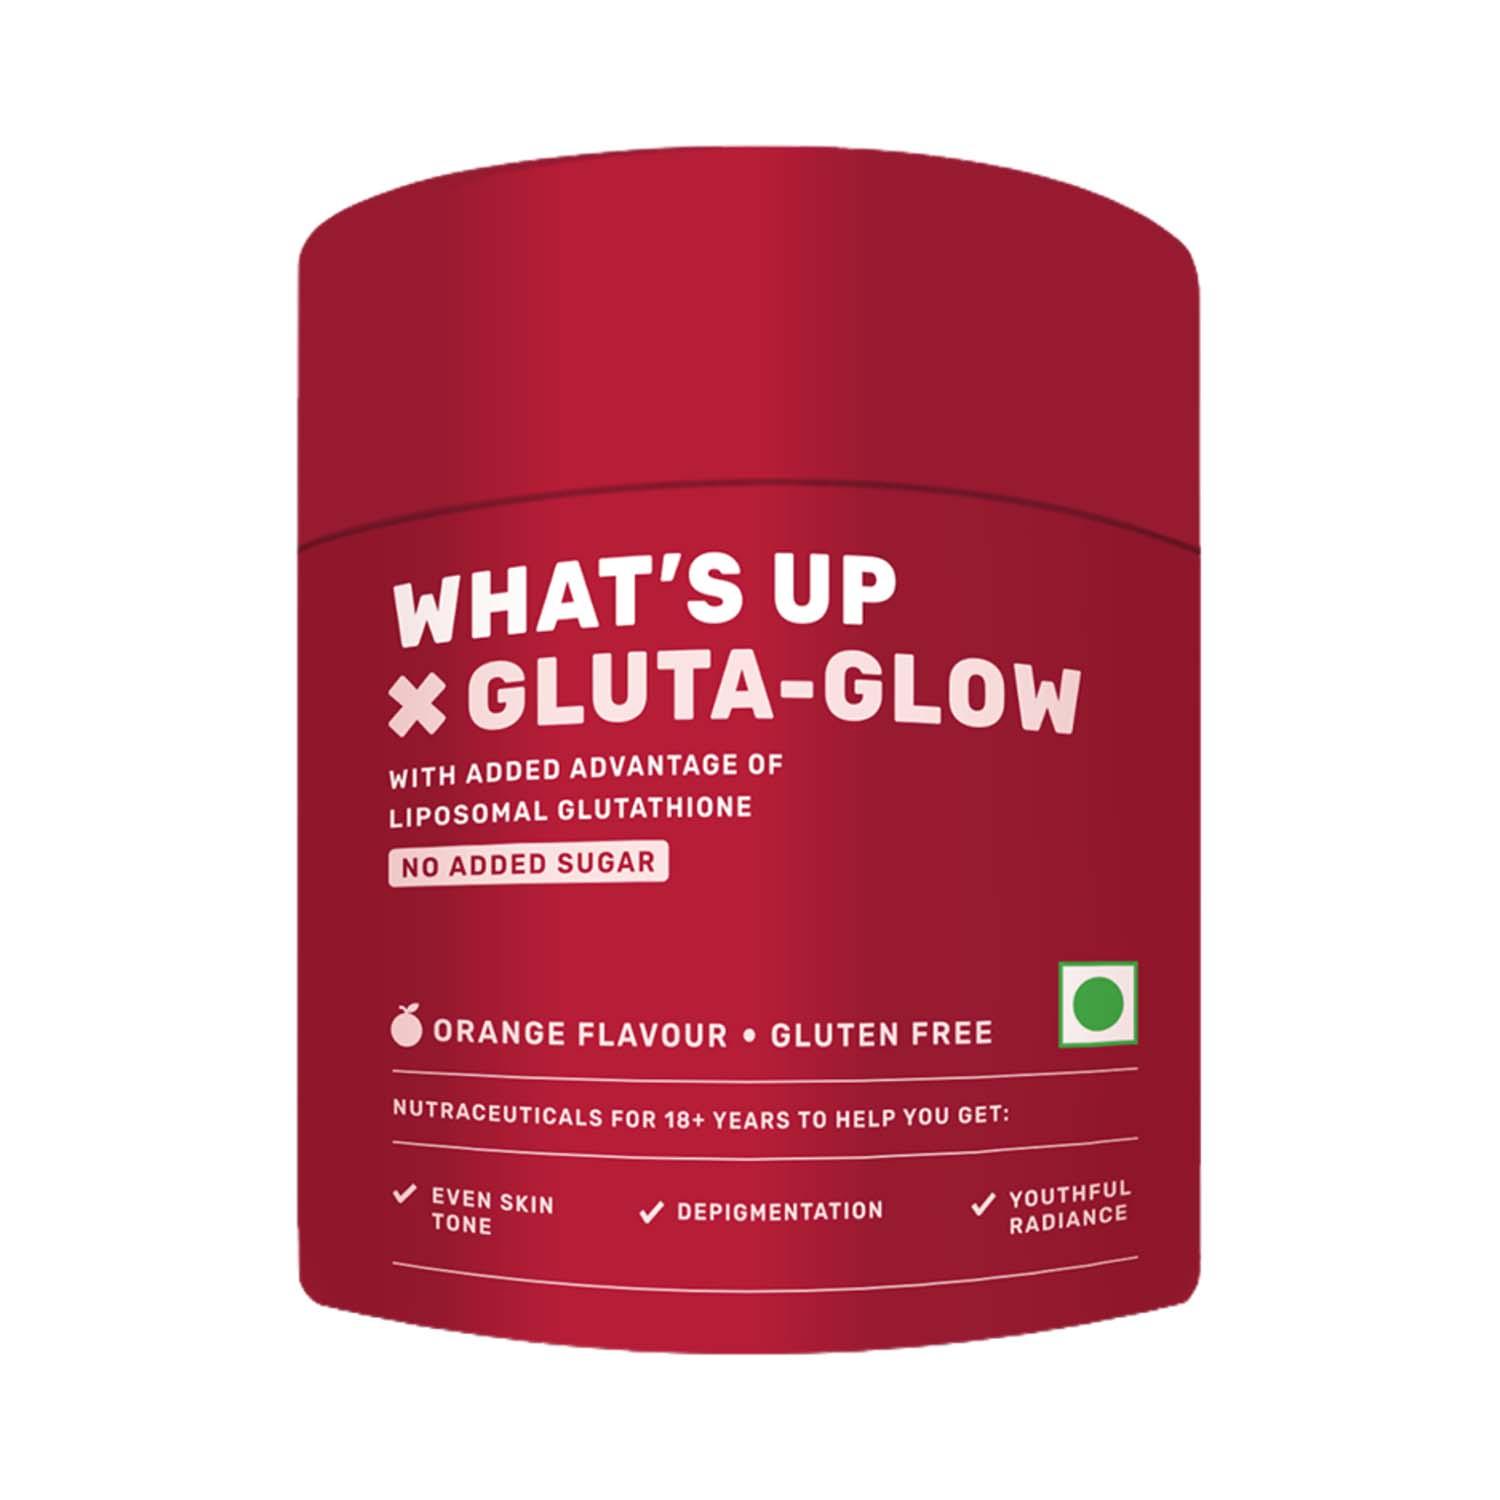 What's Up Wellness | What's Up Wellness Glutathione-Glow Gummies Radiant & Youthful Skin No Added Sugar (15 Day Pack)